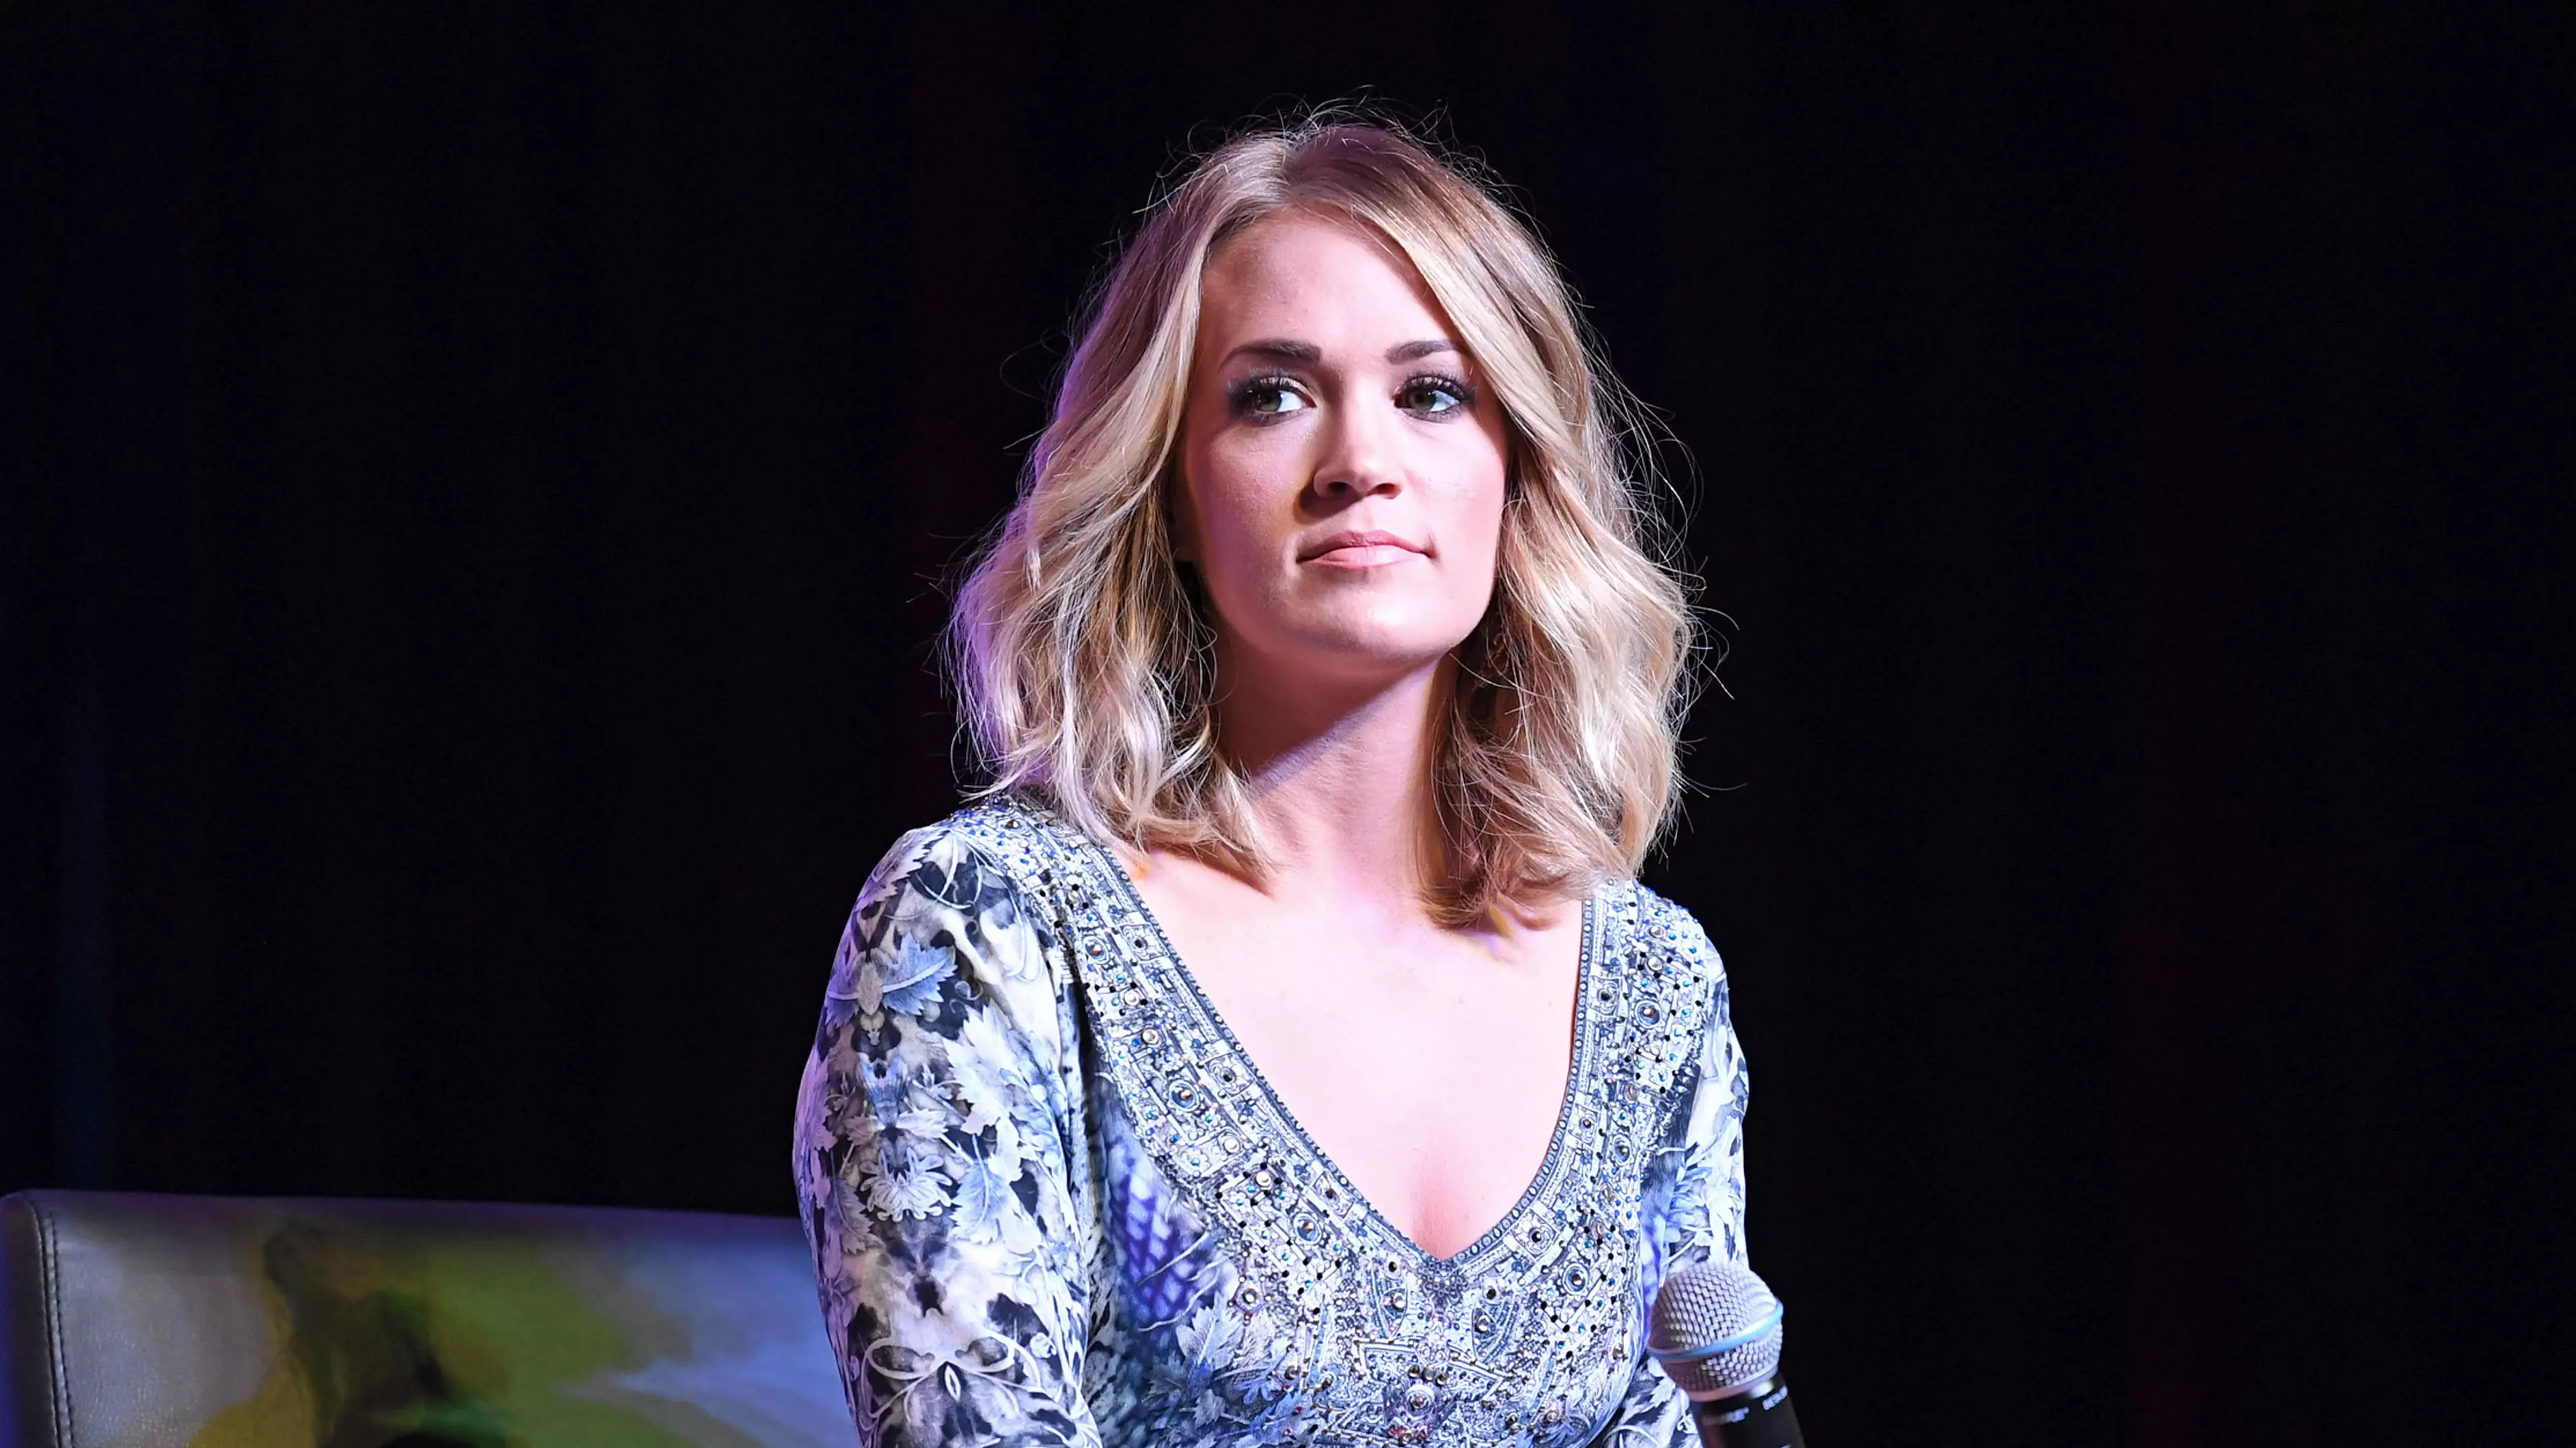 Photograph Of Carrie Underwood Appears Online After She Warned Fans She 'Might Look Different'